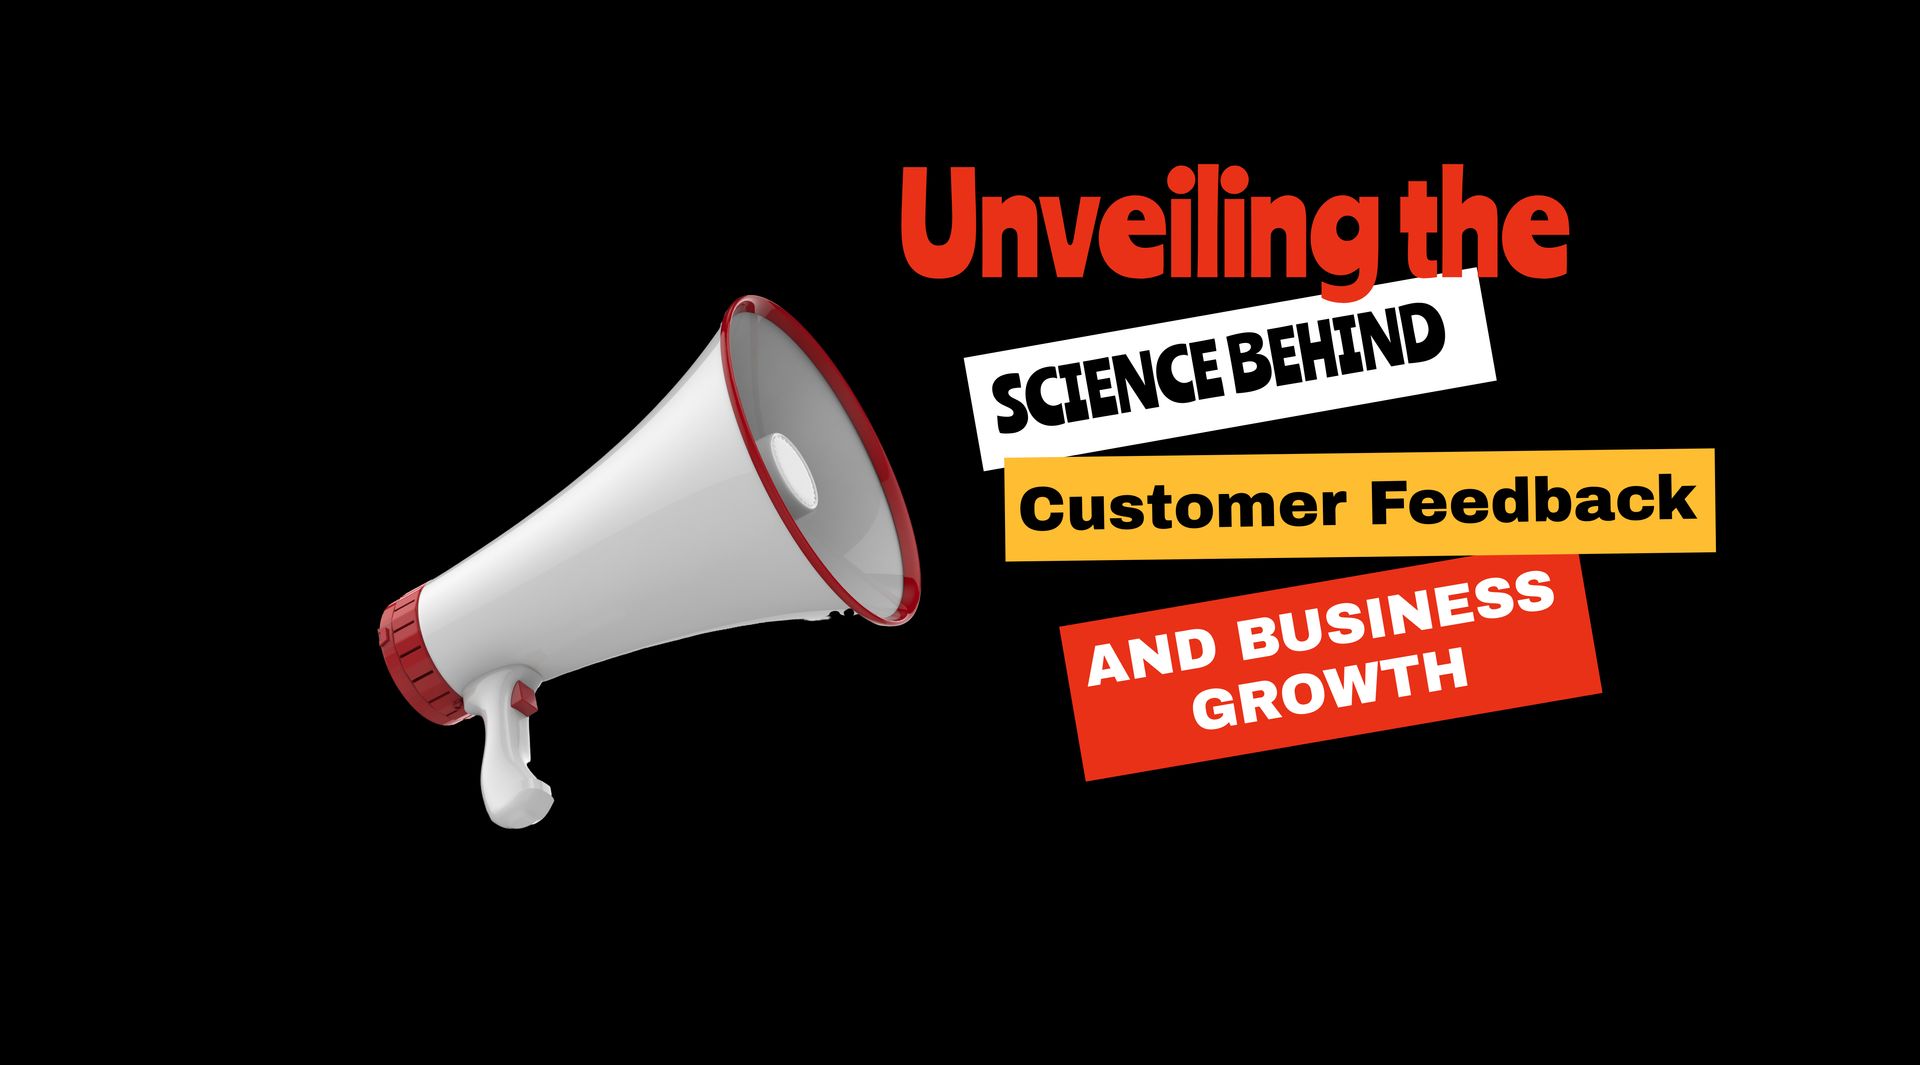 Unveiling the Science Behind Customer Feedback and Business Growth